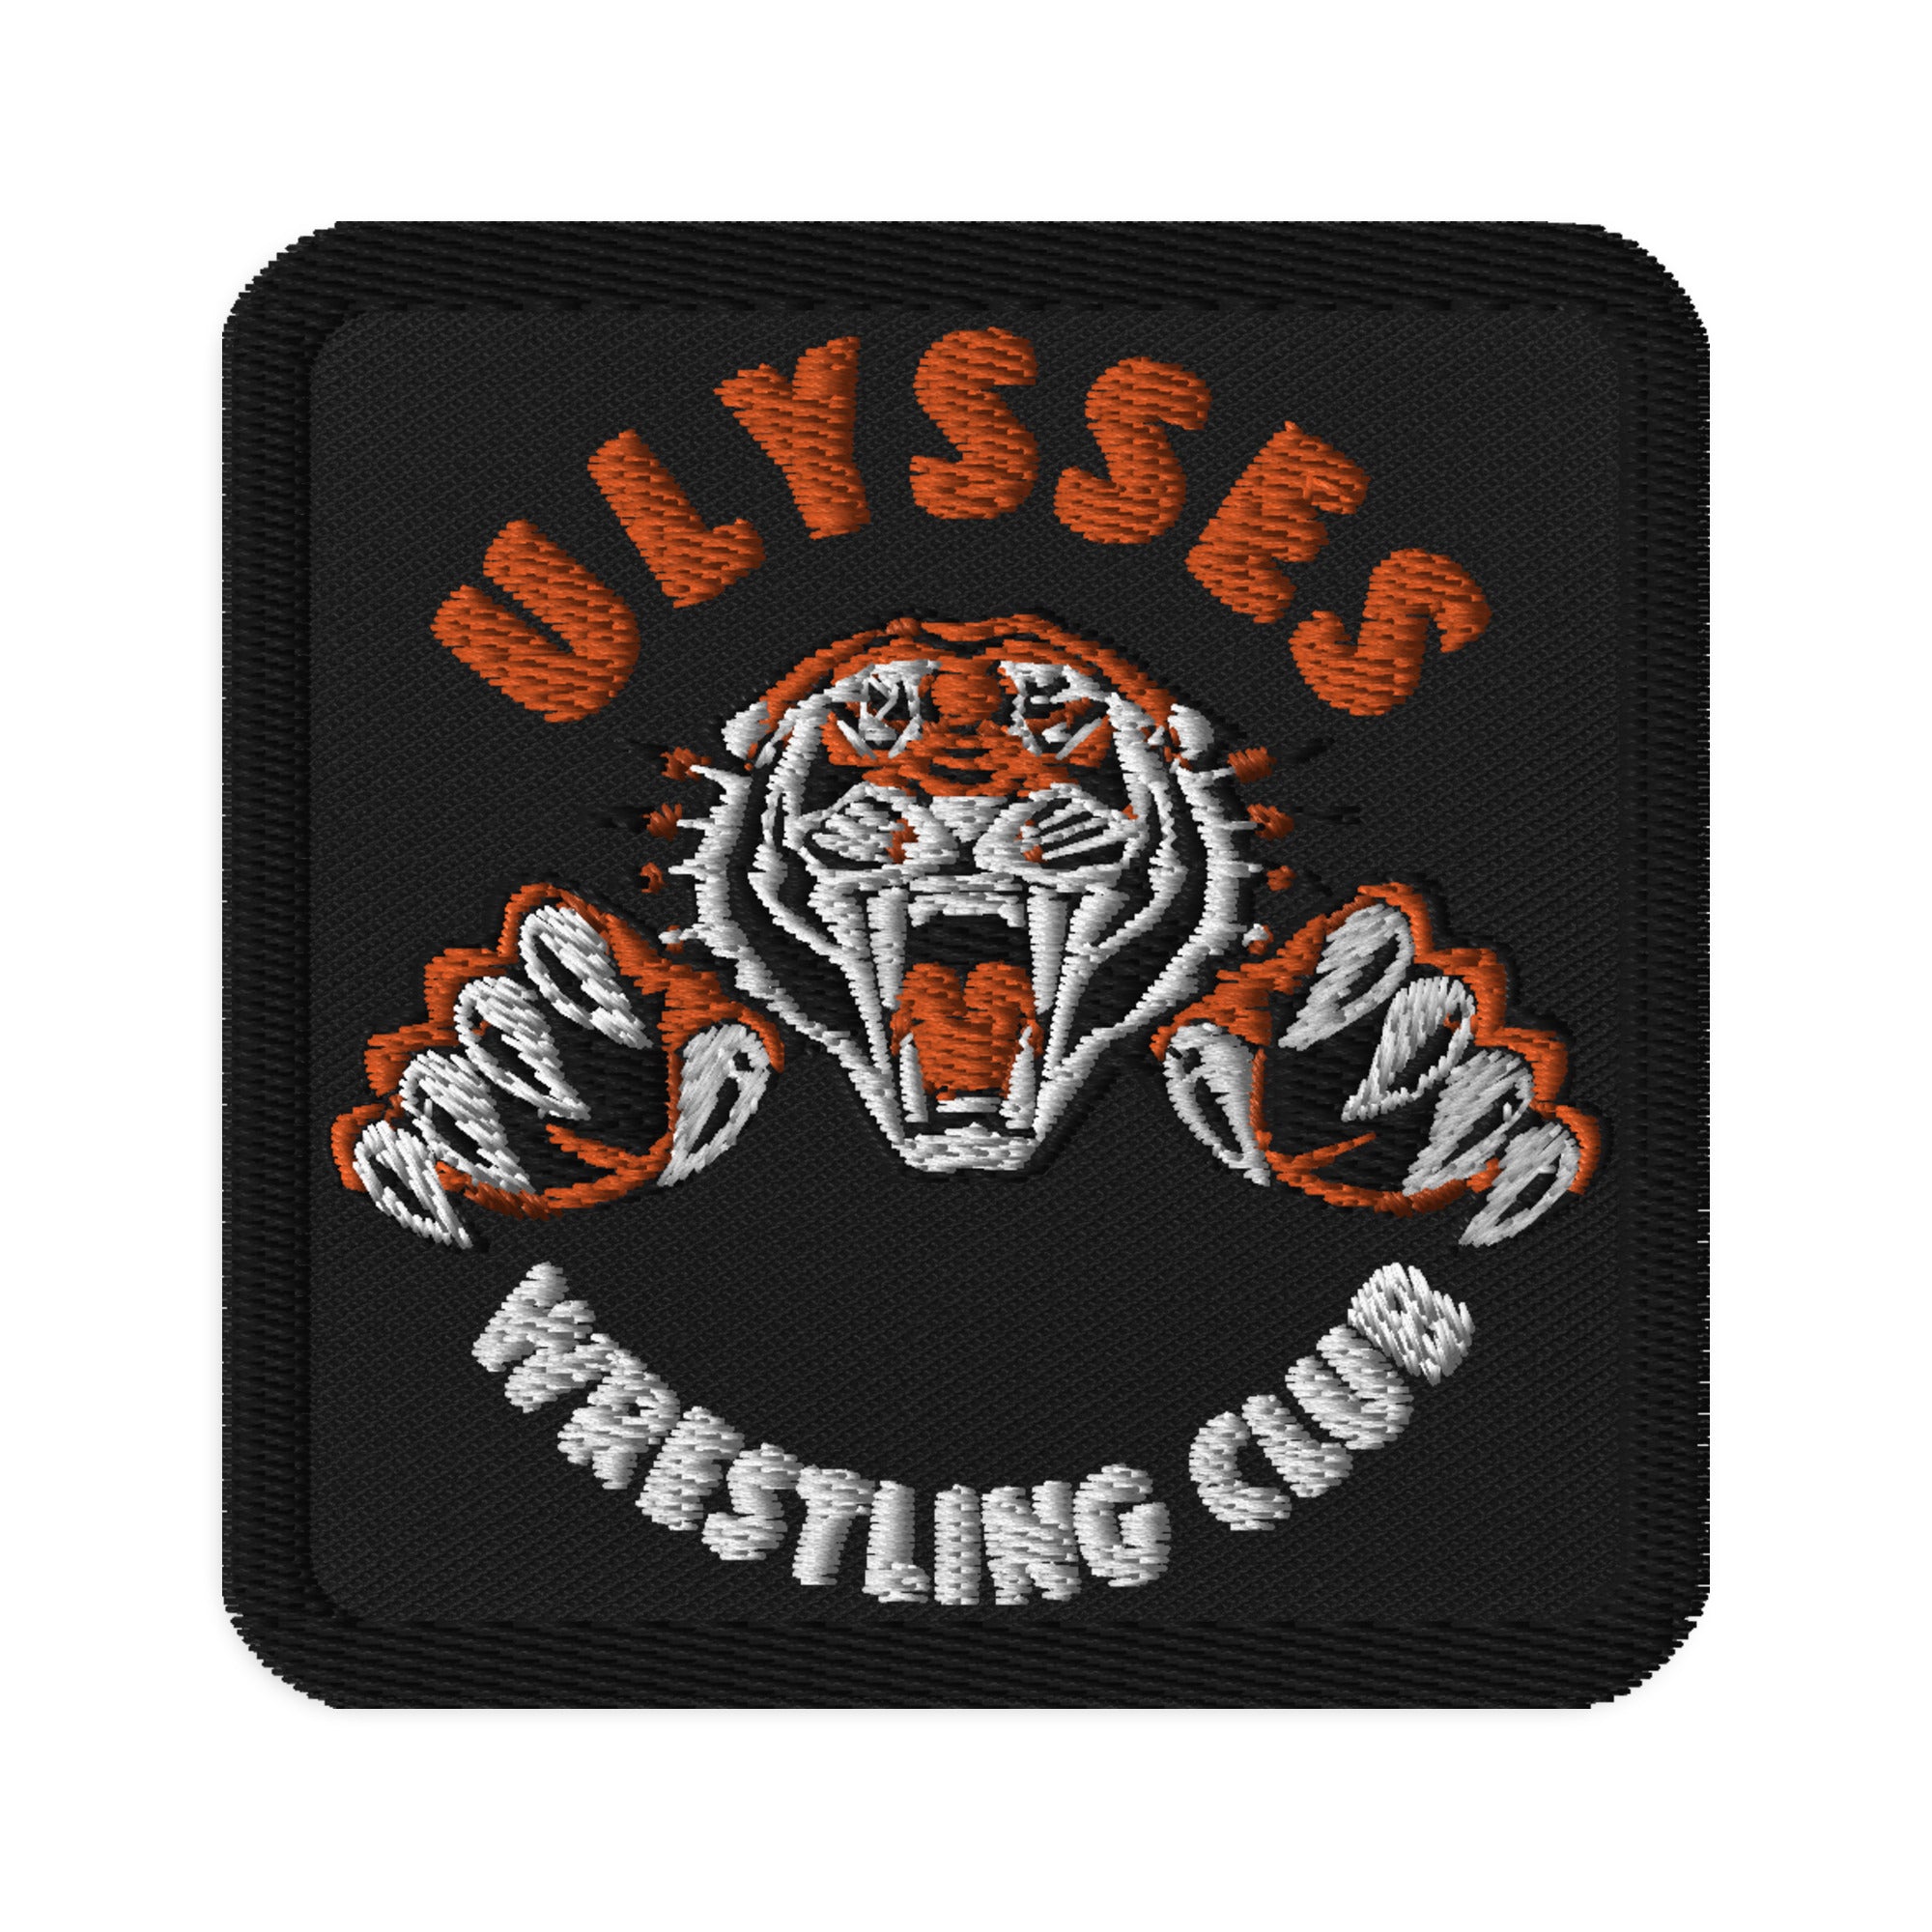 Ulysses Wrestling Club, Embroidered Patches